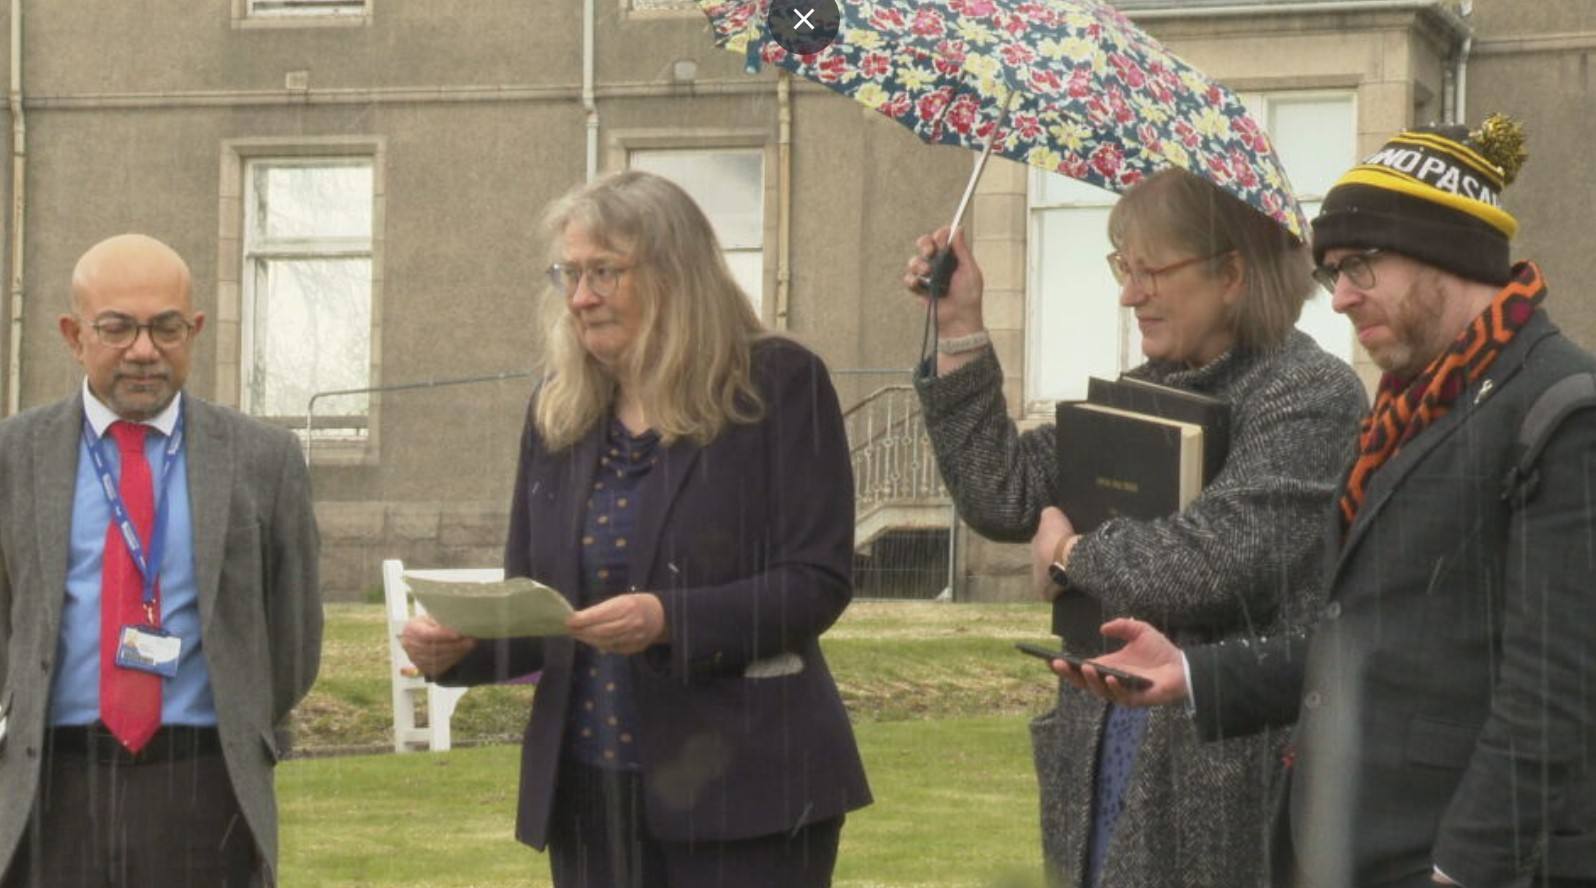 A tree has been planted and a plaque unveiled in memory of Dr Brenda Page